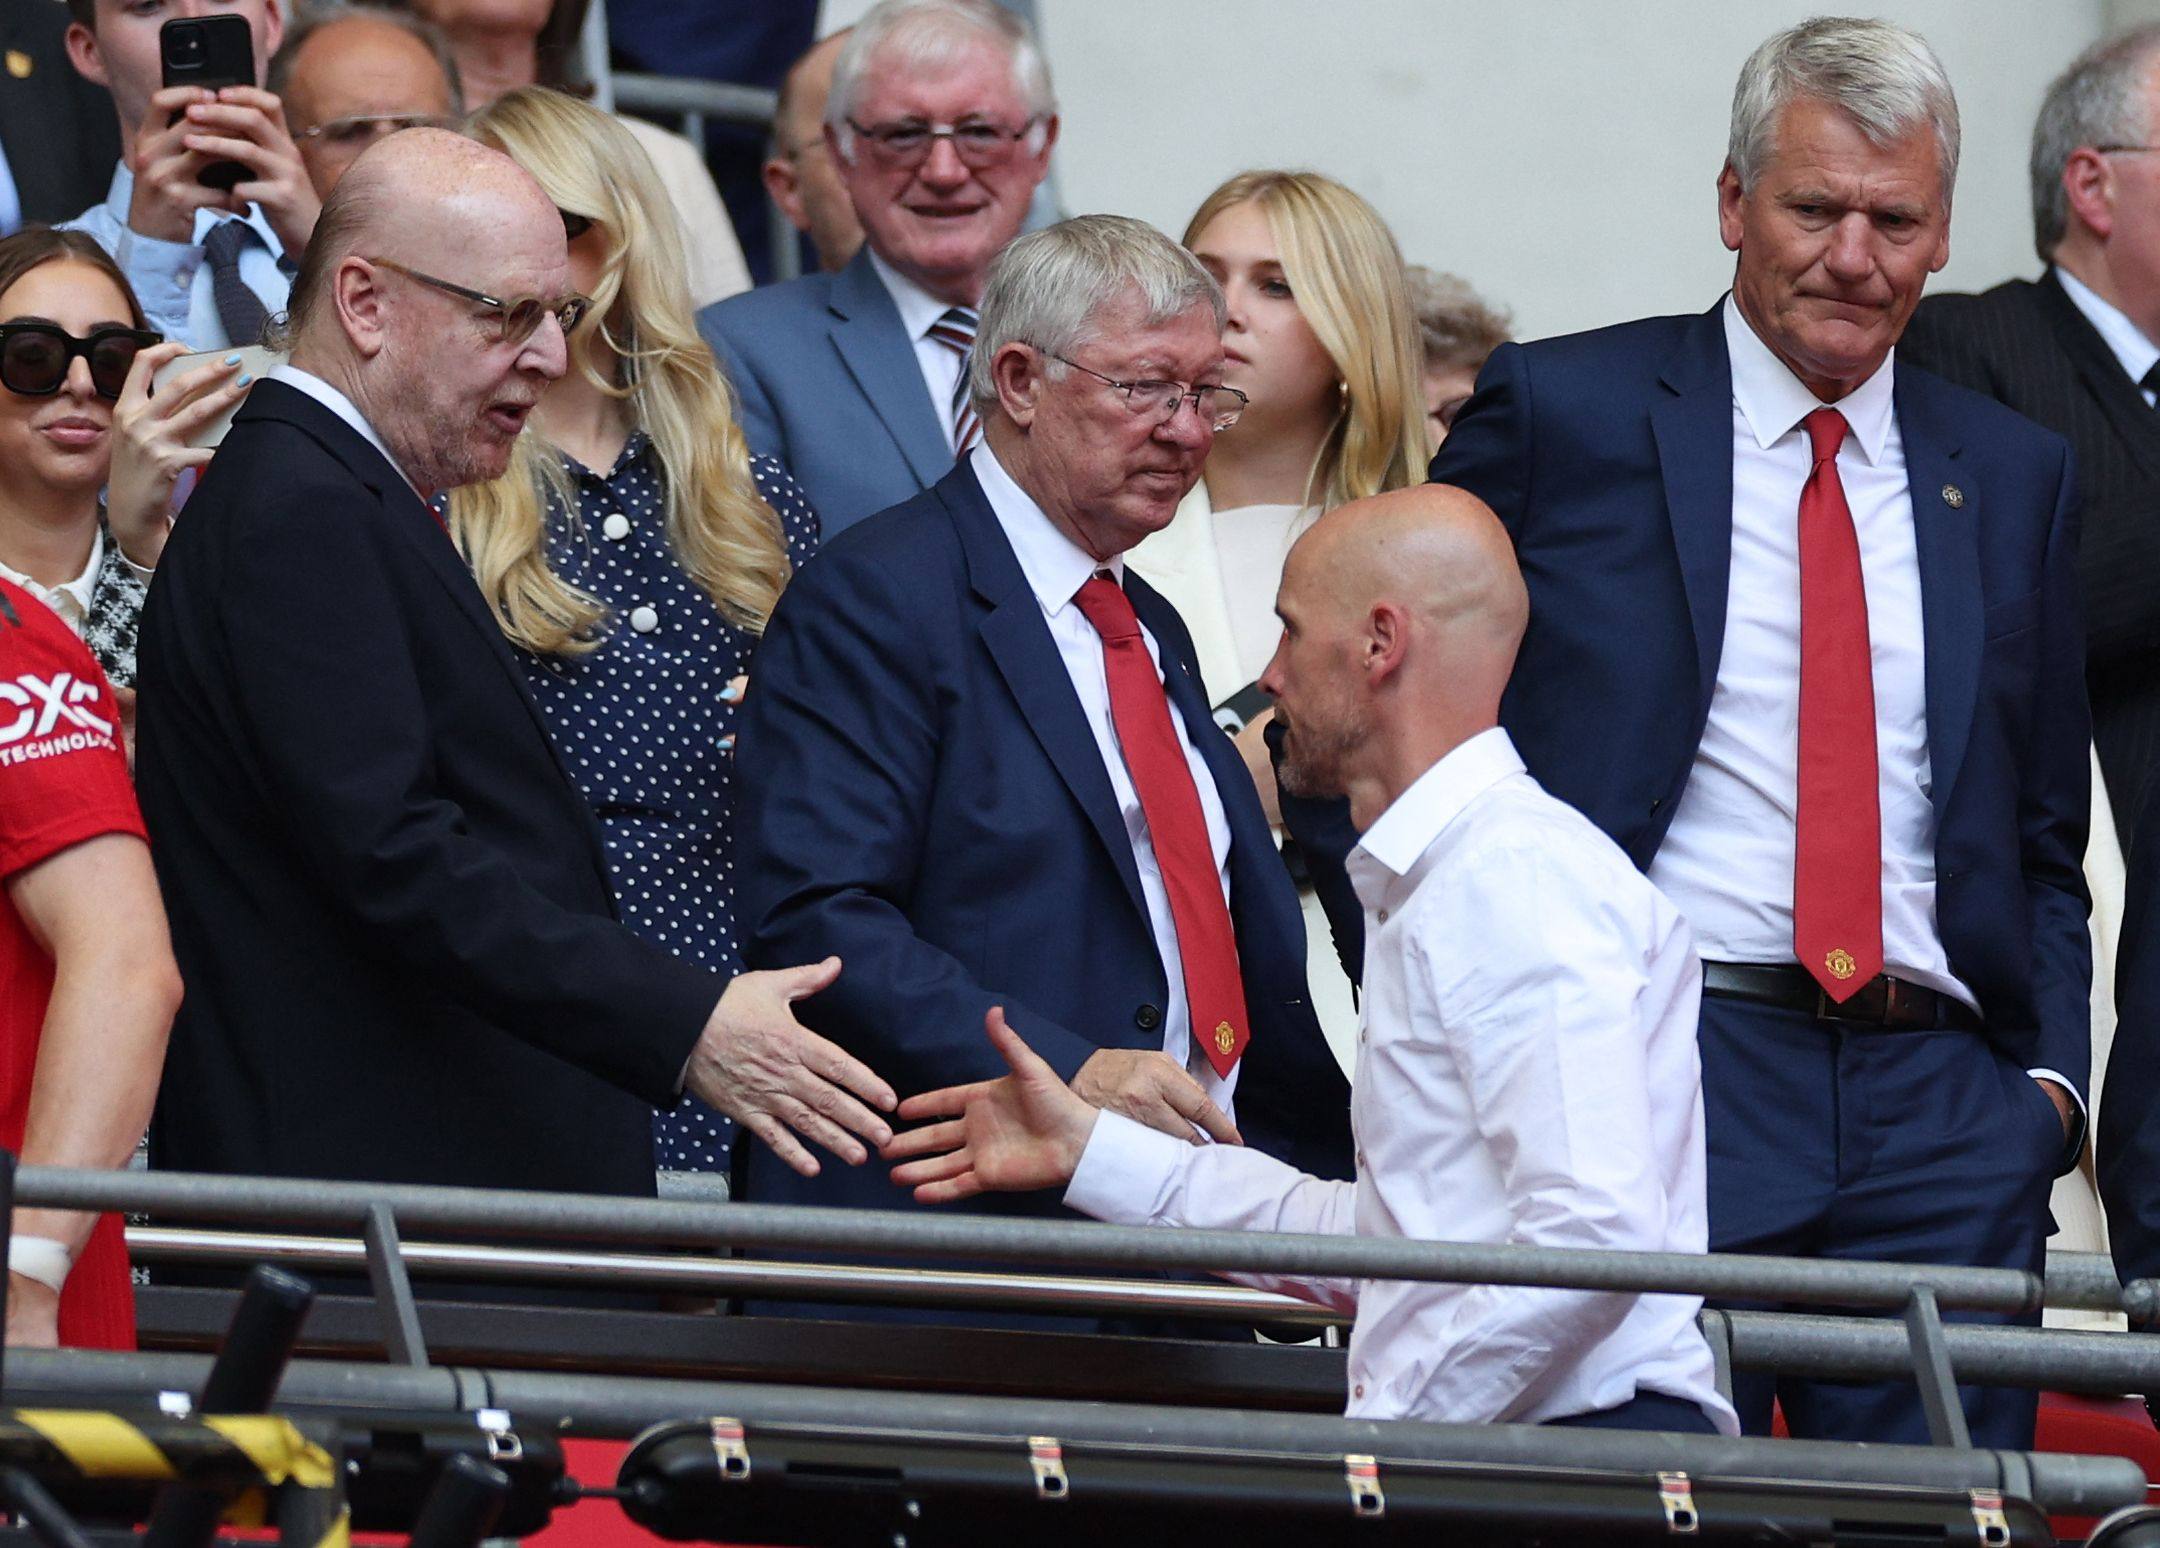 Manchester United co-owner Avram Glazer (left), former manager Sir Alex Ferguson and ex-chief executive David Gill shake hands with manager Erik ten Hag after the English FA Cup final loss to Manchester City at Wembley Stadium in London on June 3. Photo: AFP